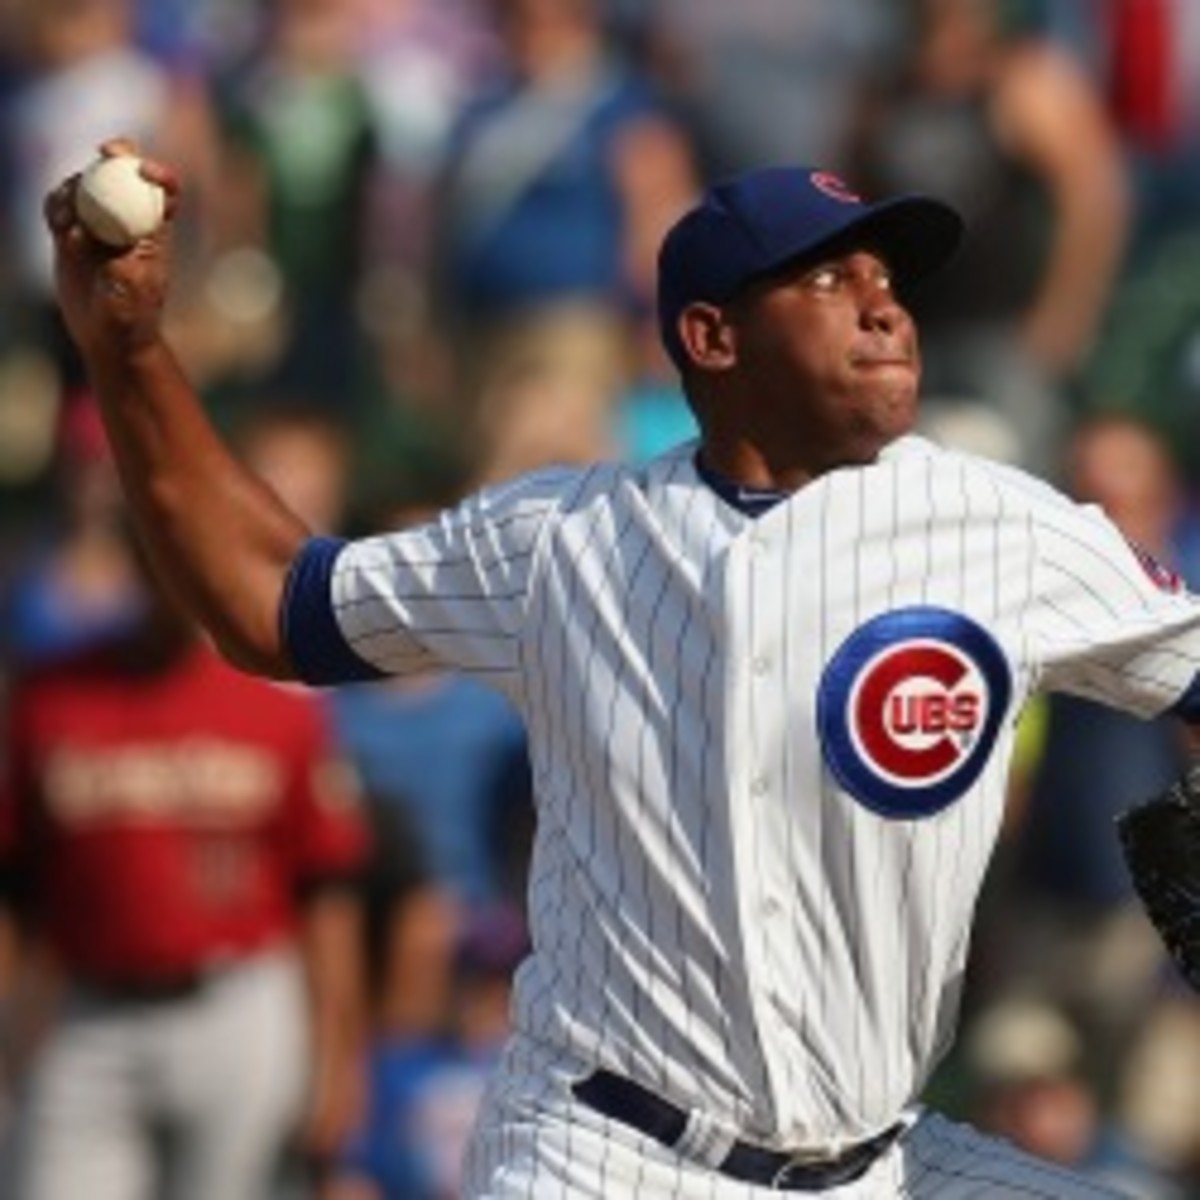 The Cubs have reportedly told pitcher Carlos Marmol's agent to "expect" a trade. (Jonathan Daniel/Getty Images)